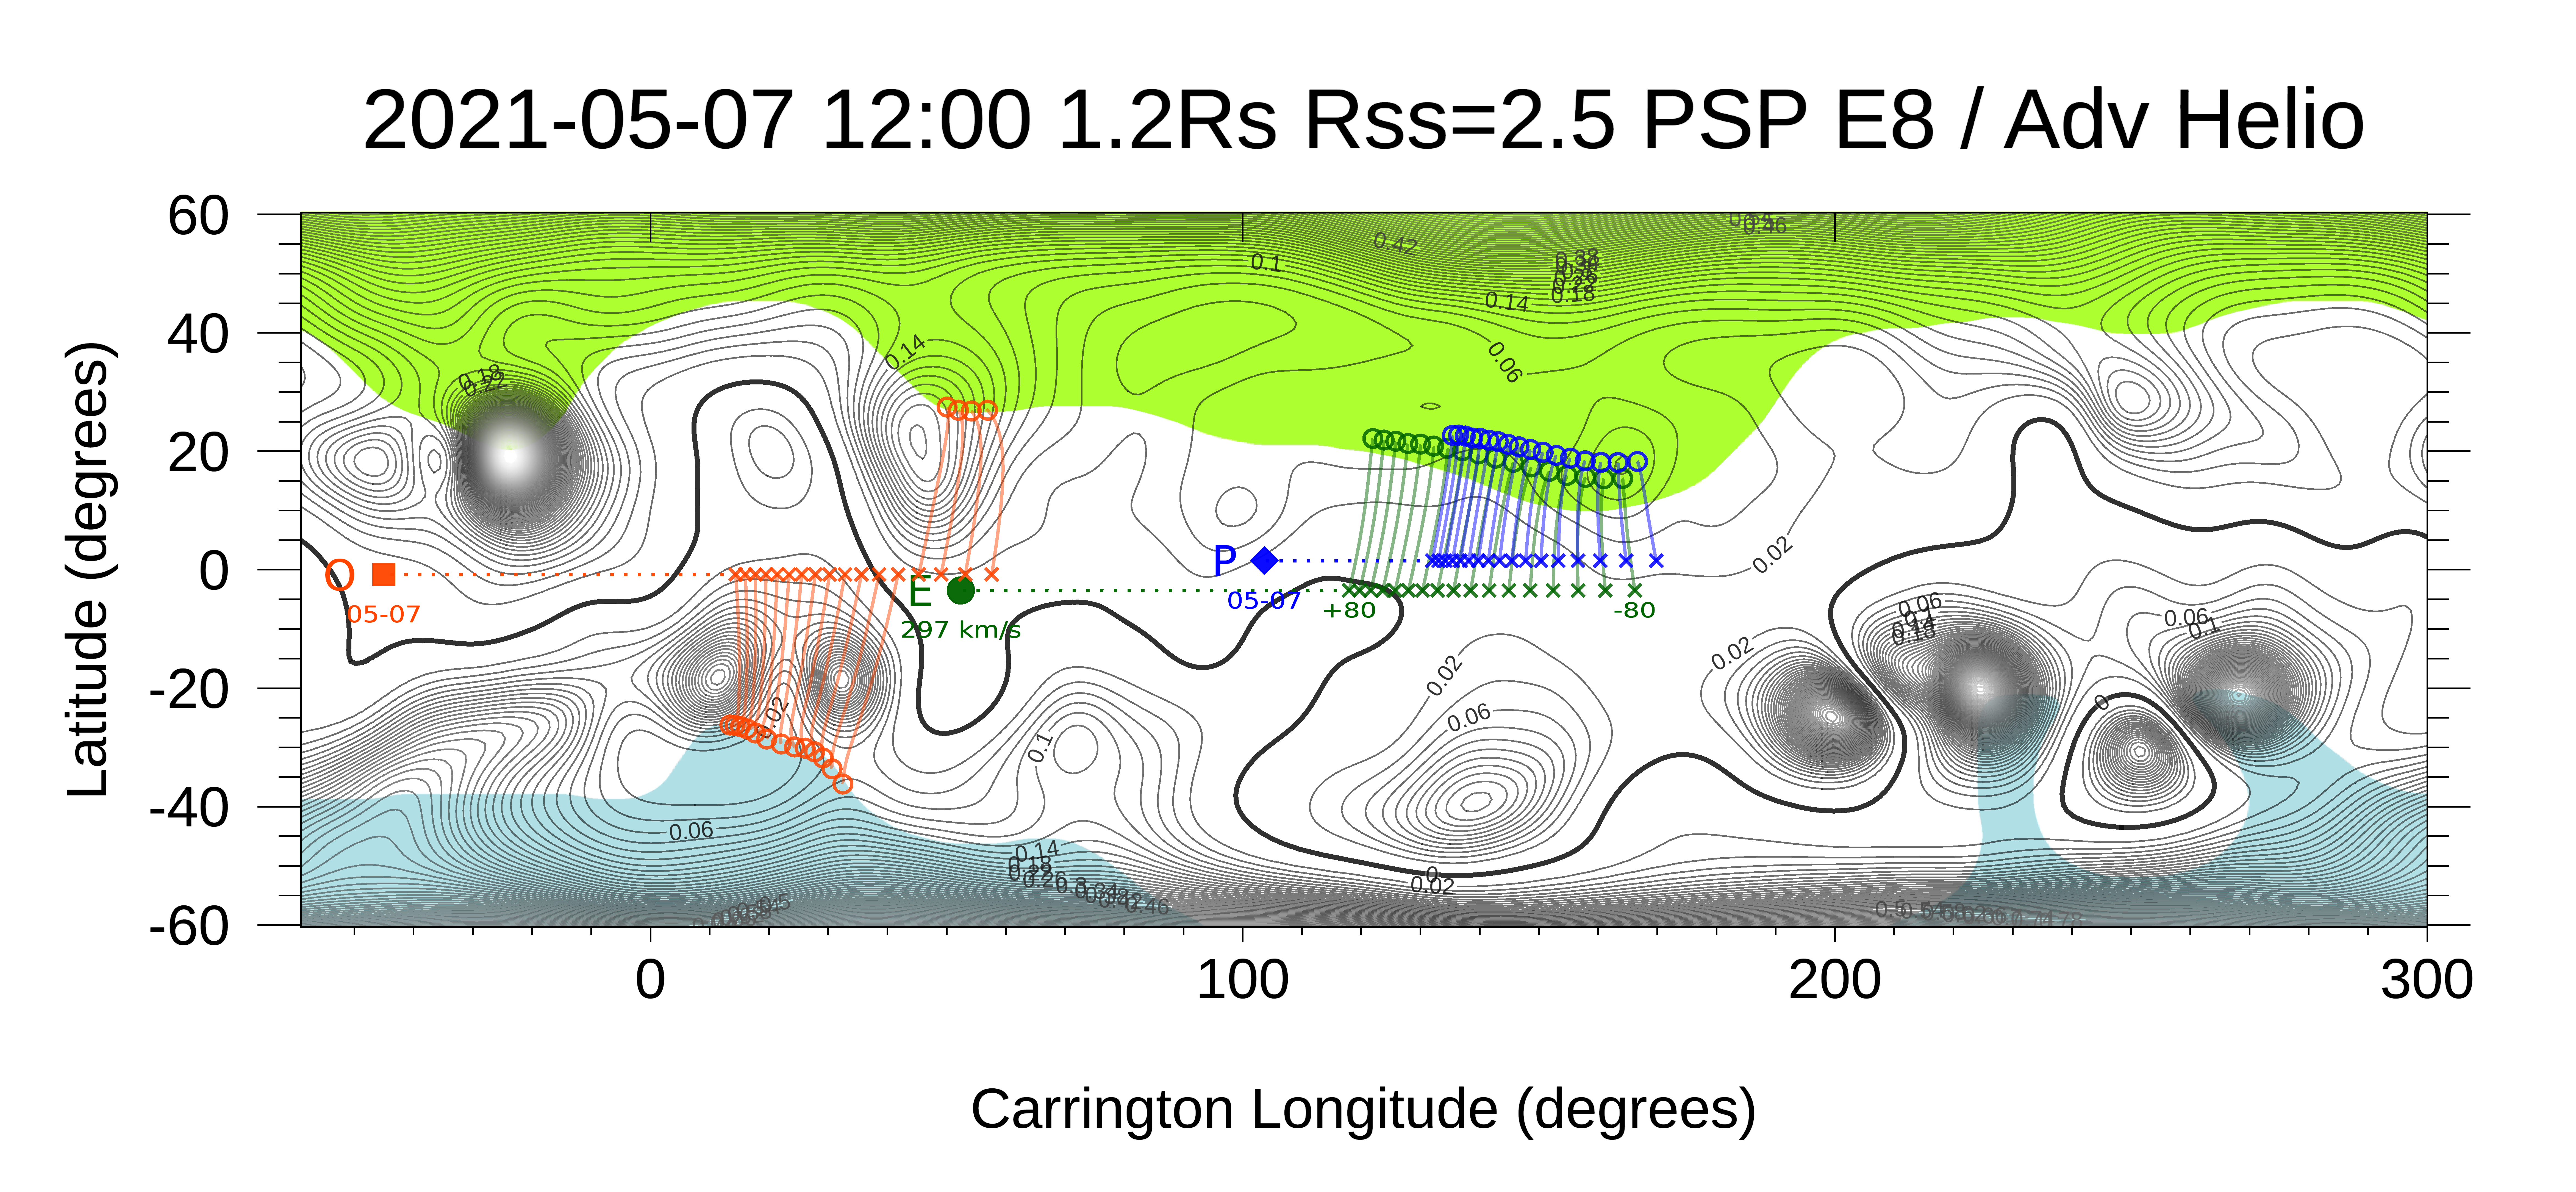 Earth, PSP and Solar Orbiter positions and magnetic connections on May 7, 2021. PSP and Earth are magnetically connected to the same open magnetic flux region and measuring properties of the same solar wind stream.